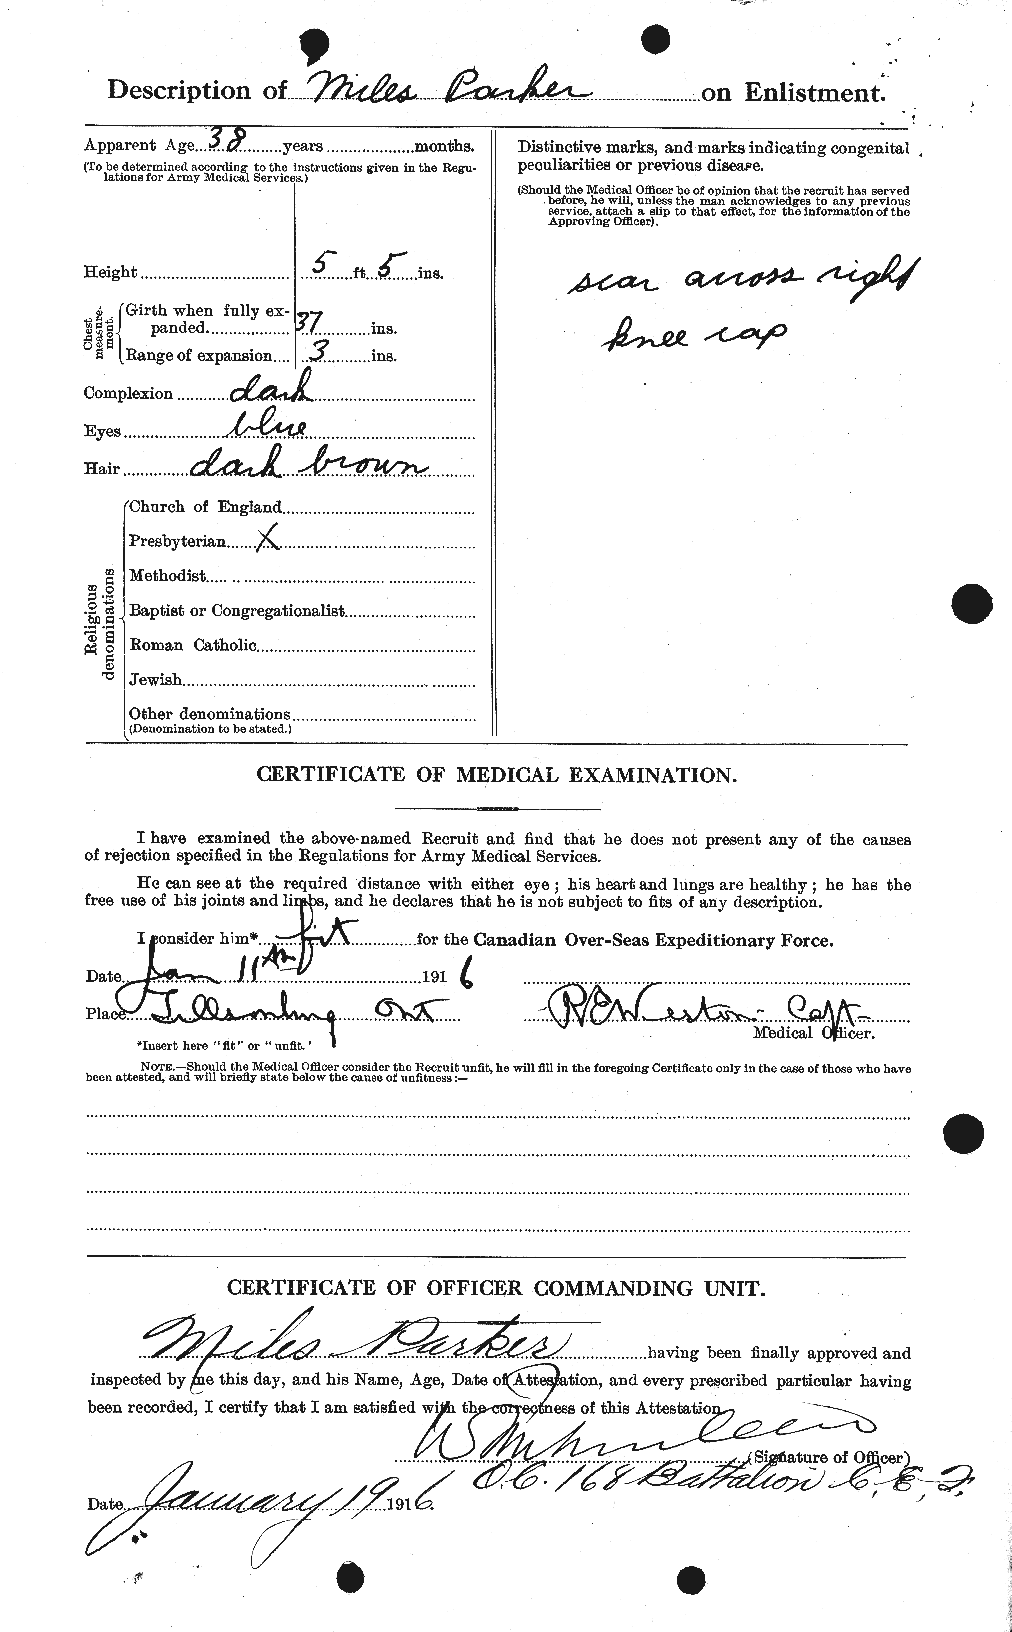 Personnel Records of the First World War - CEF 565547b